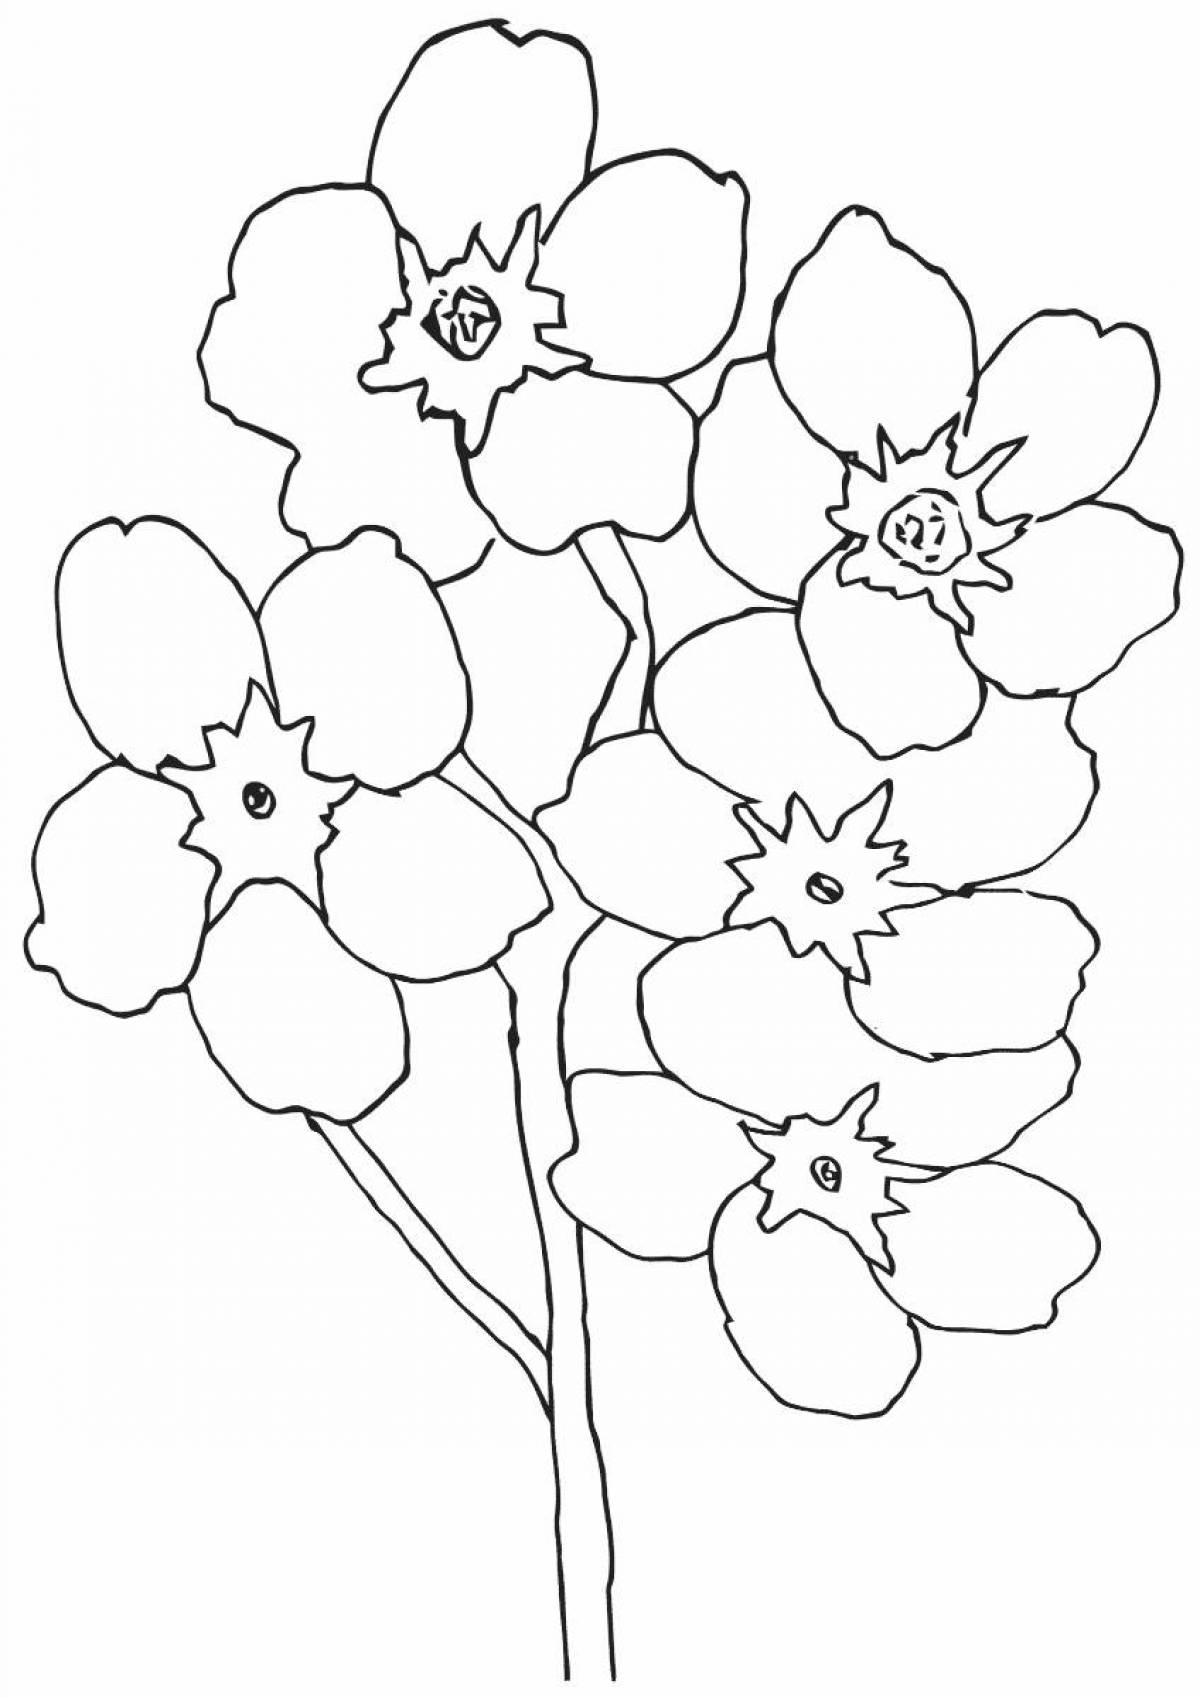 Forget-me-not coloring page